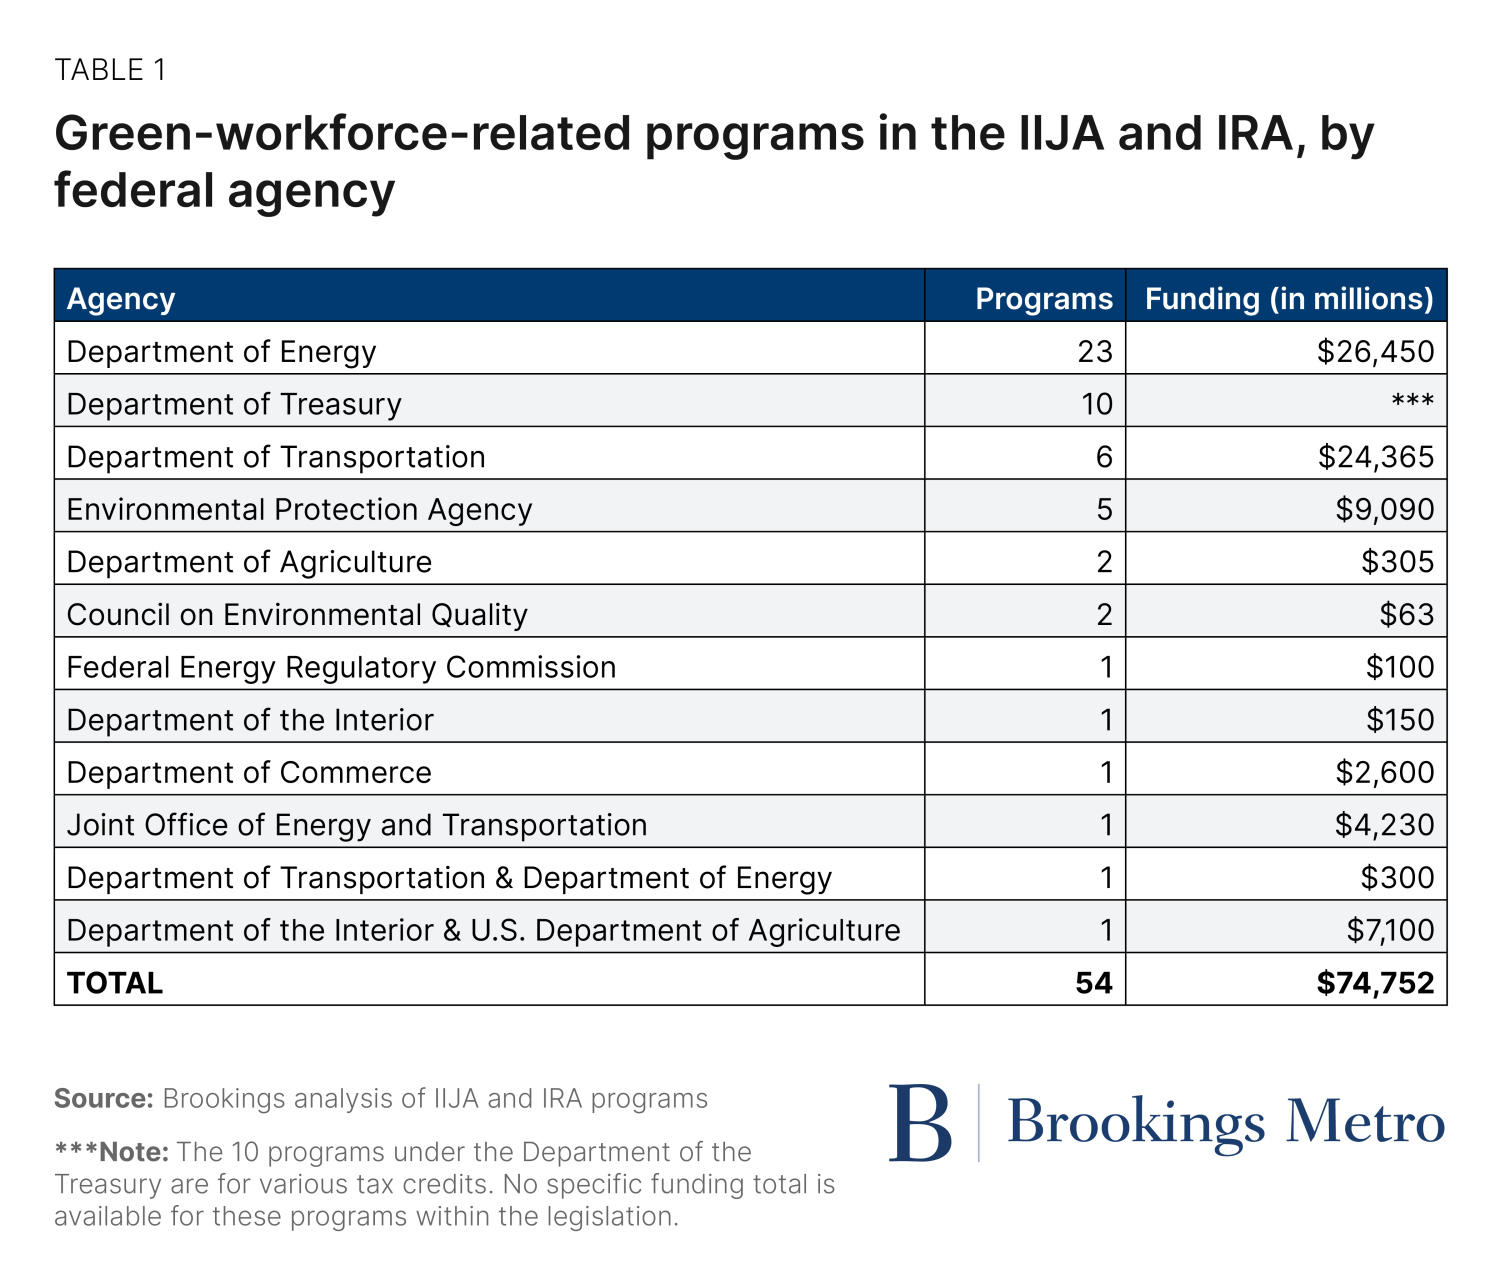 Table 1. Green-workforce-related programs in the IIJA and IRA, by federal agency